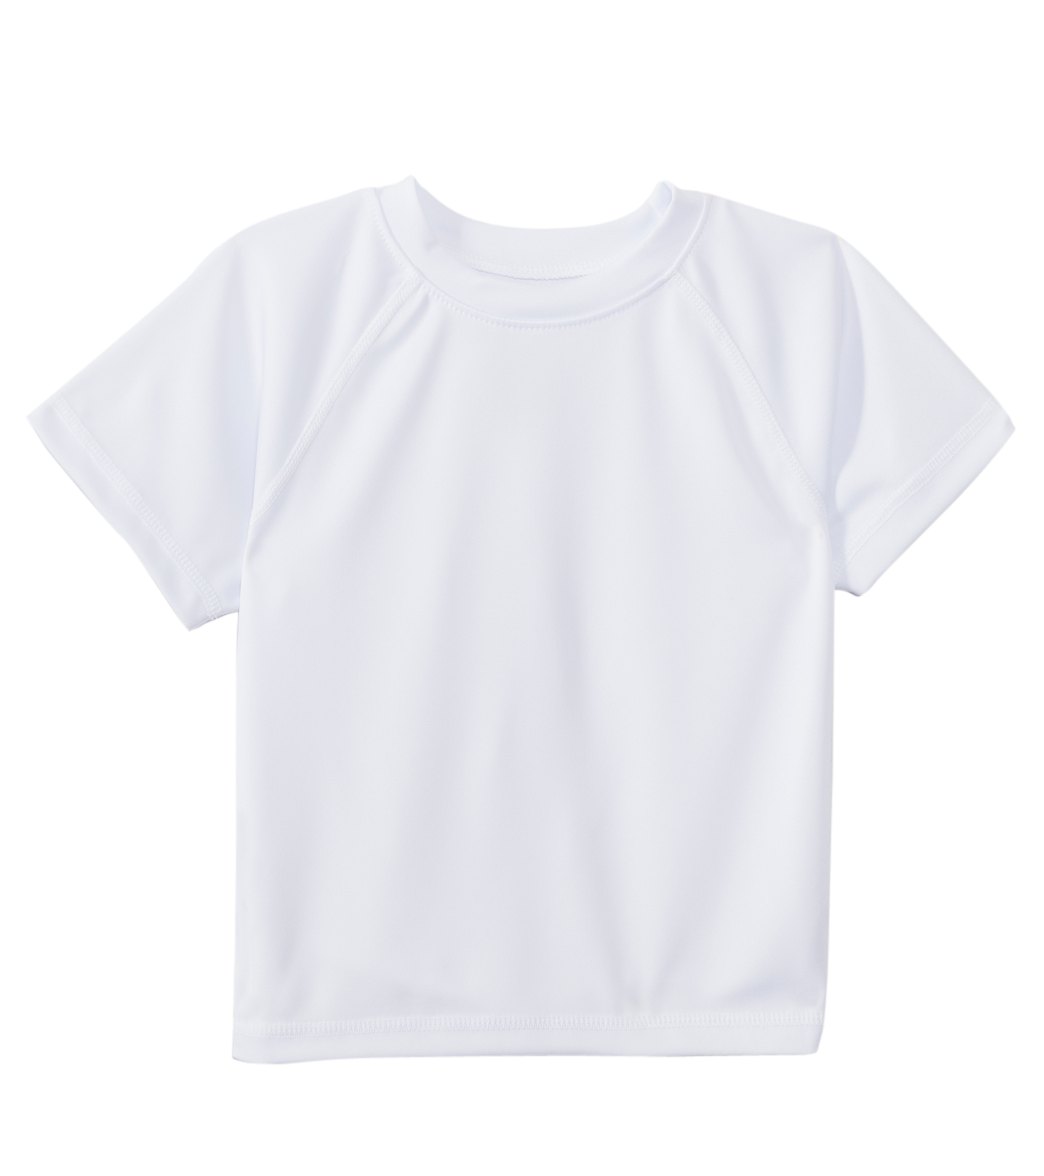 Kanu Surf Boys' Solid Swim Shirt 2T-5T - White 2T Polyester - Swimoutlet.com